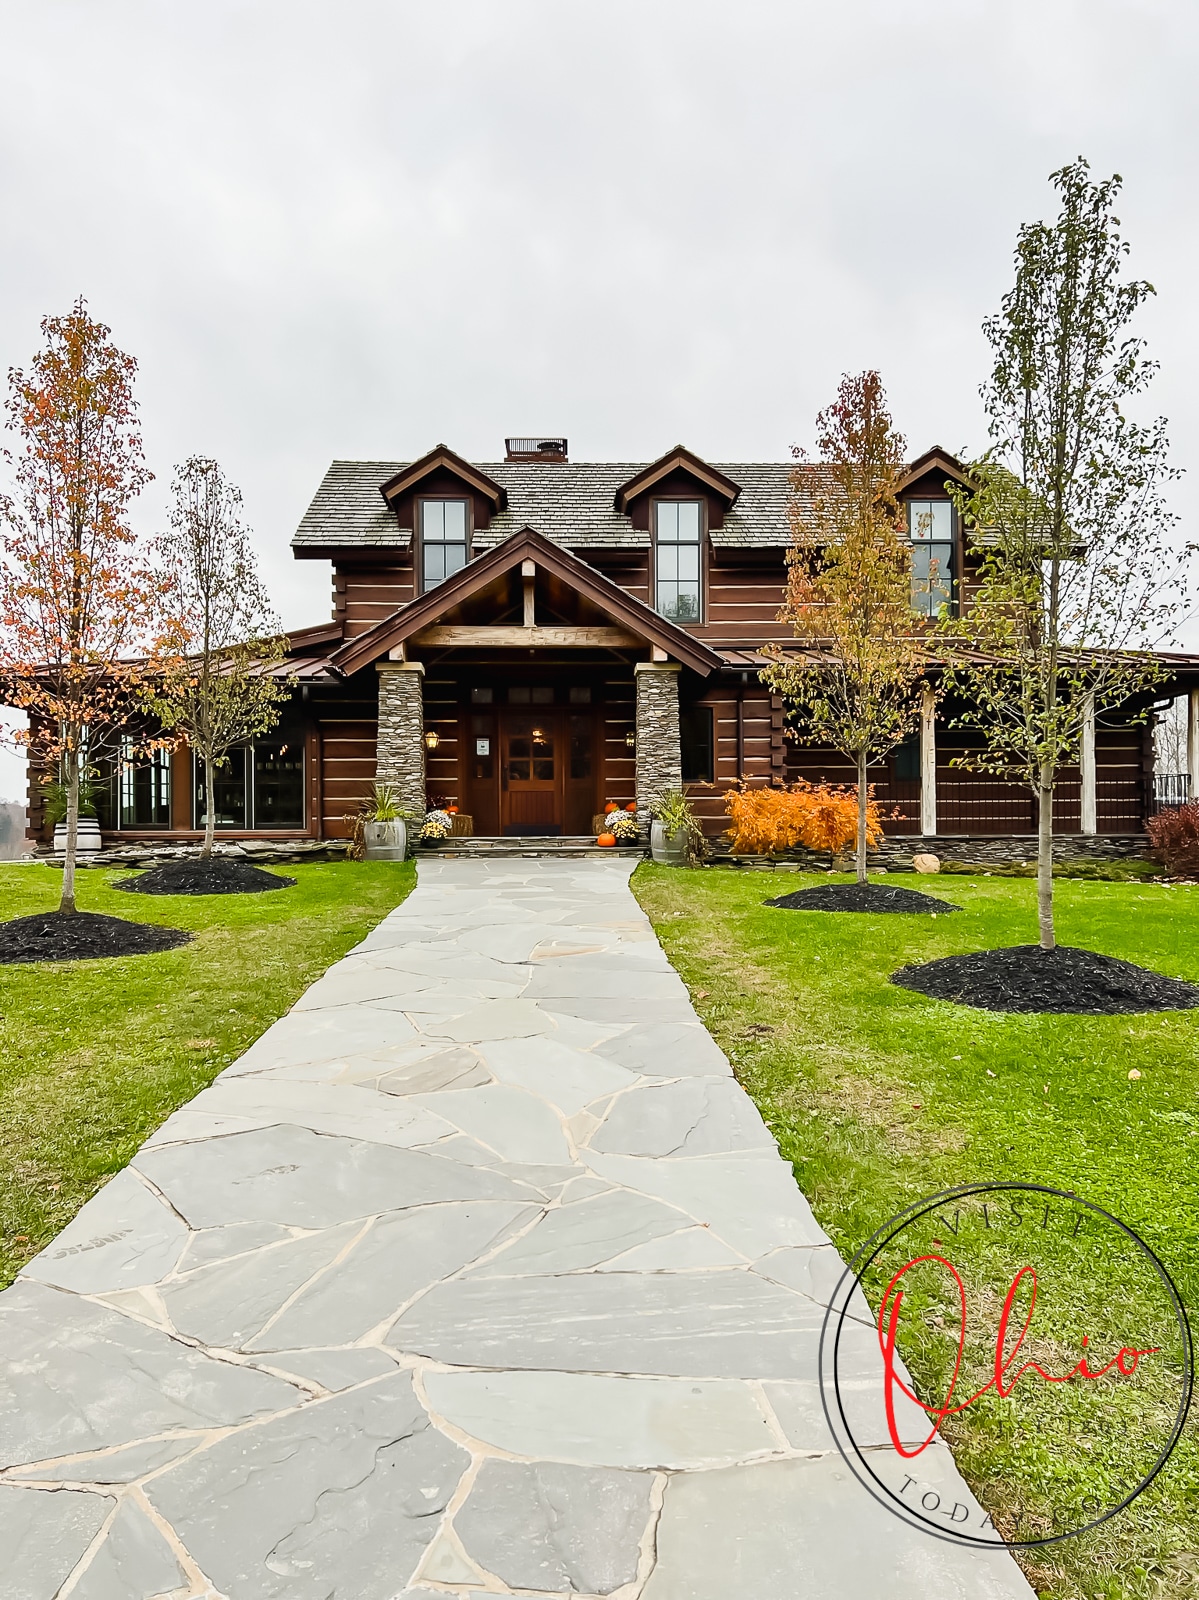 pictured is a log cabin with stone entry way, trees with orange leaves and a stone side walk leading up to buliding